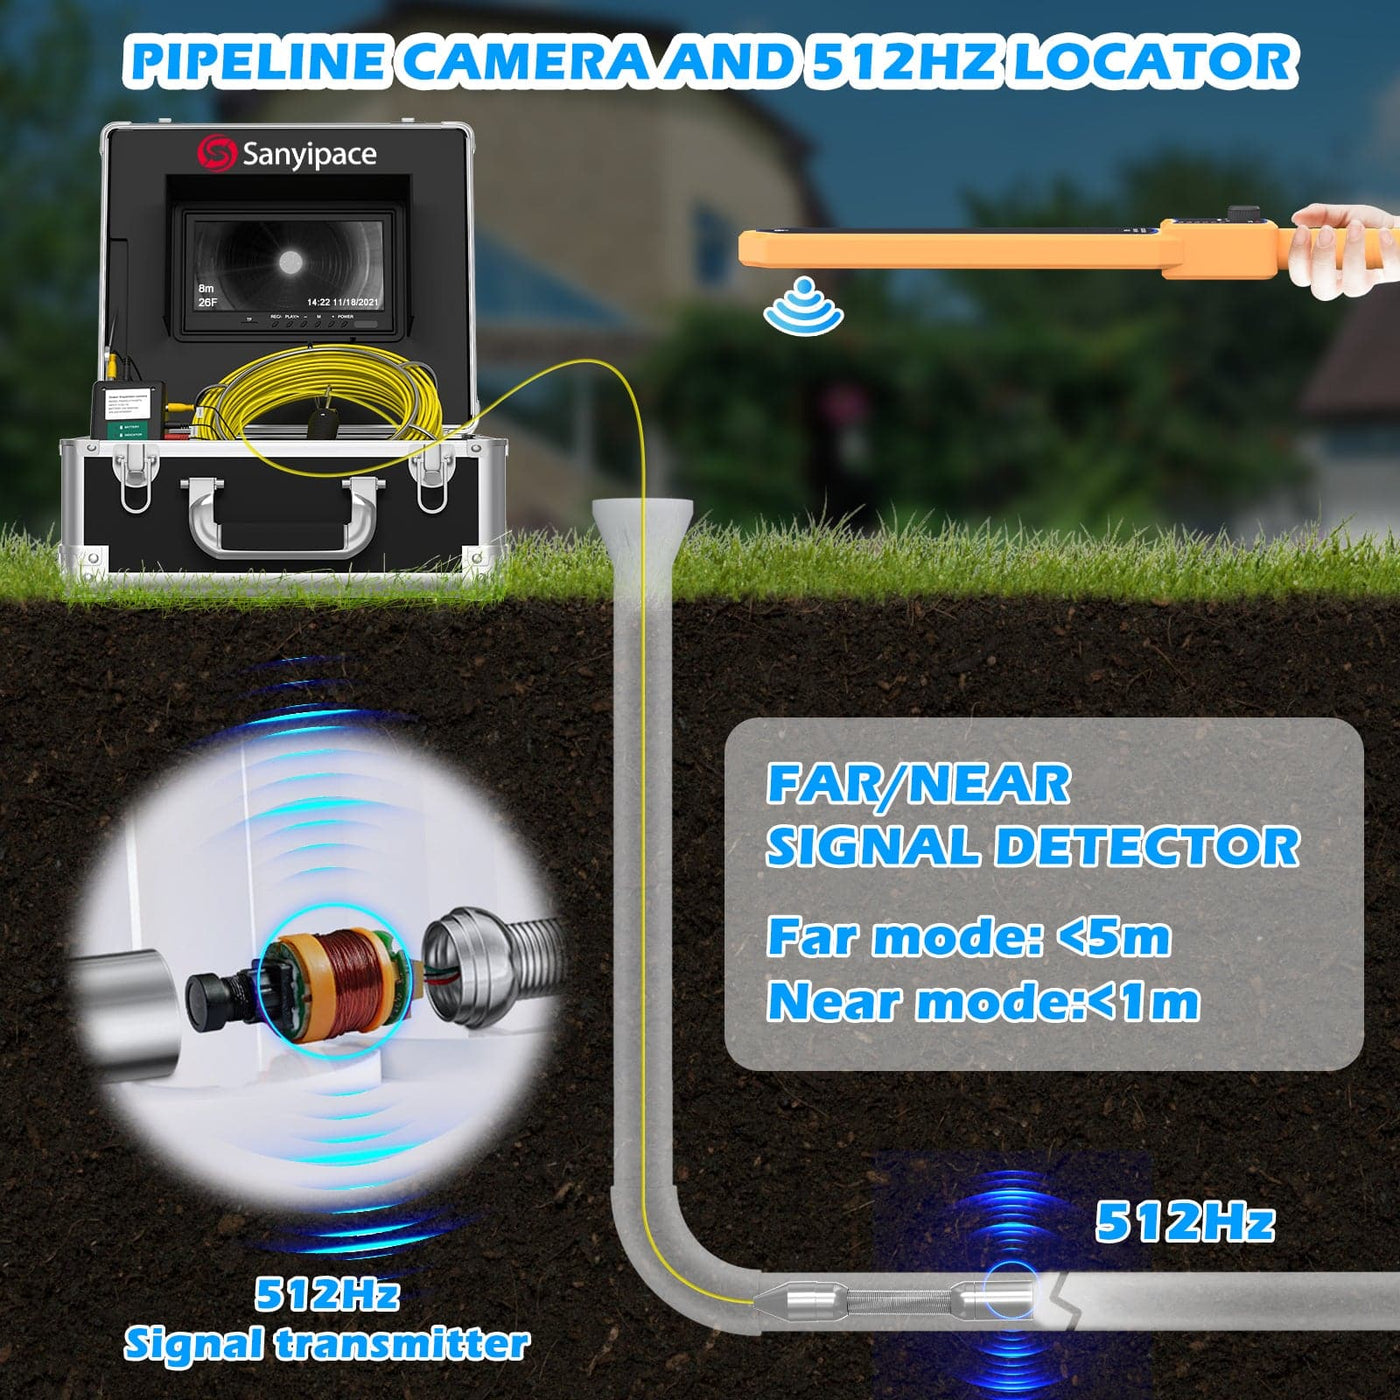 Sanyipace Sewer Camera Pipe Inspection Camera with Locator